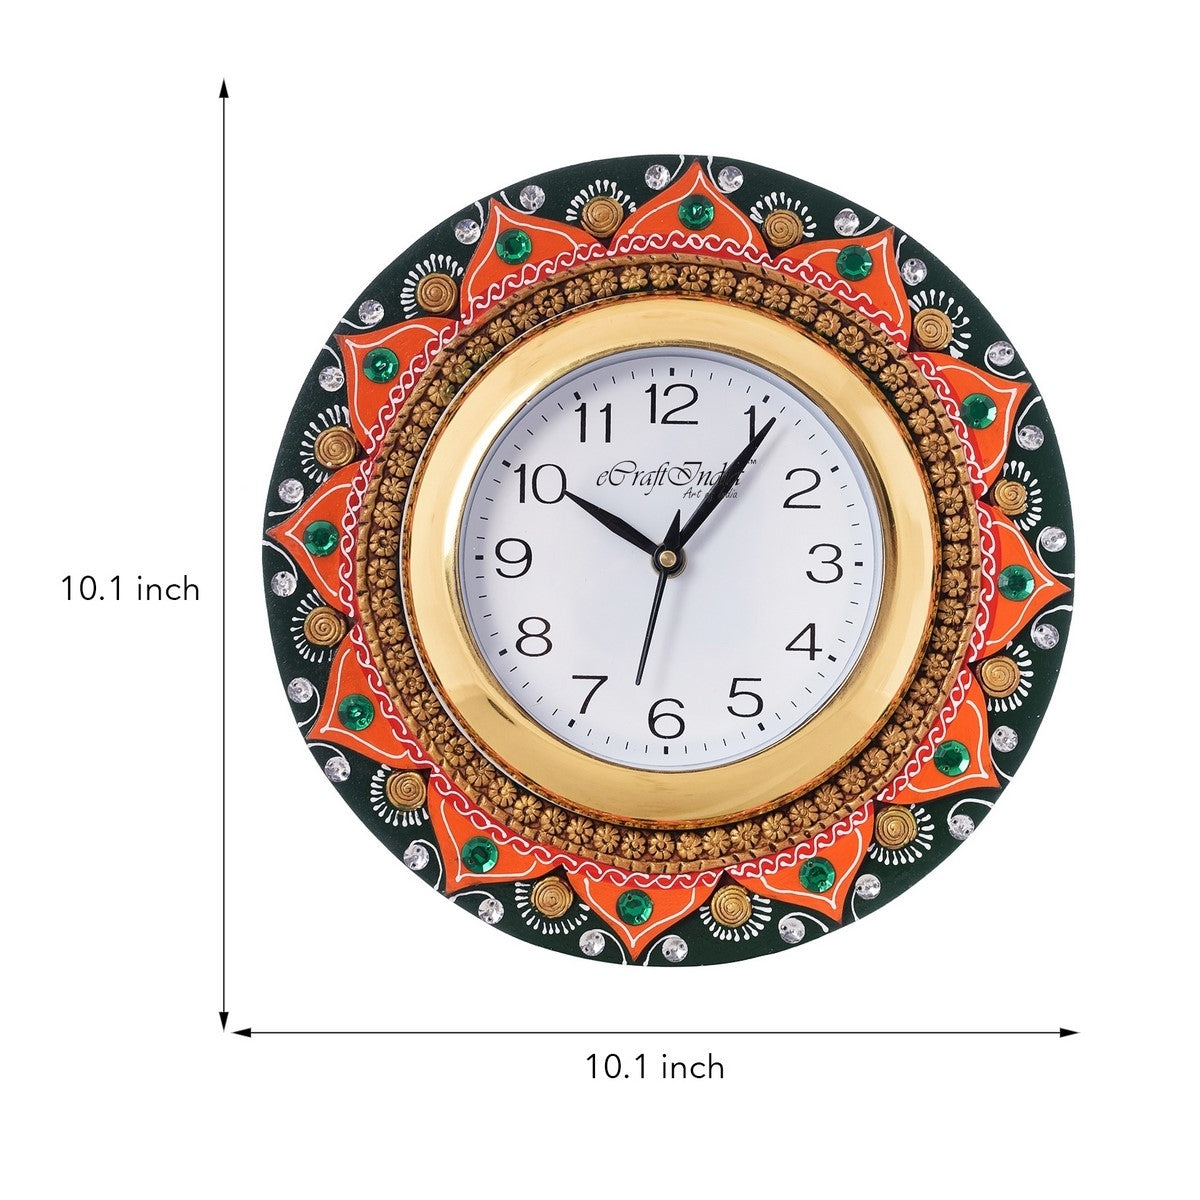 Crystal Studded Floral Shape Papier-Mache Wooden Handcrafted Wall Clock 2